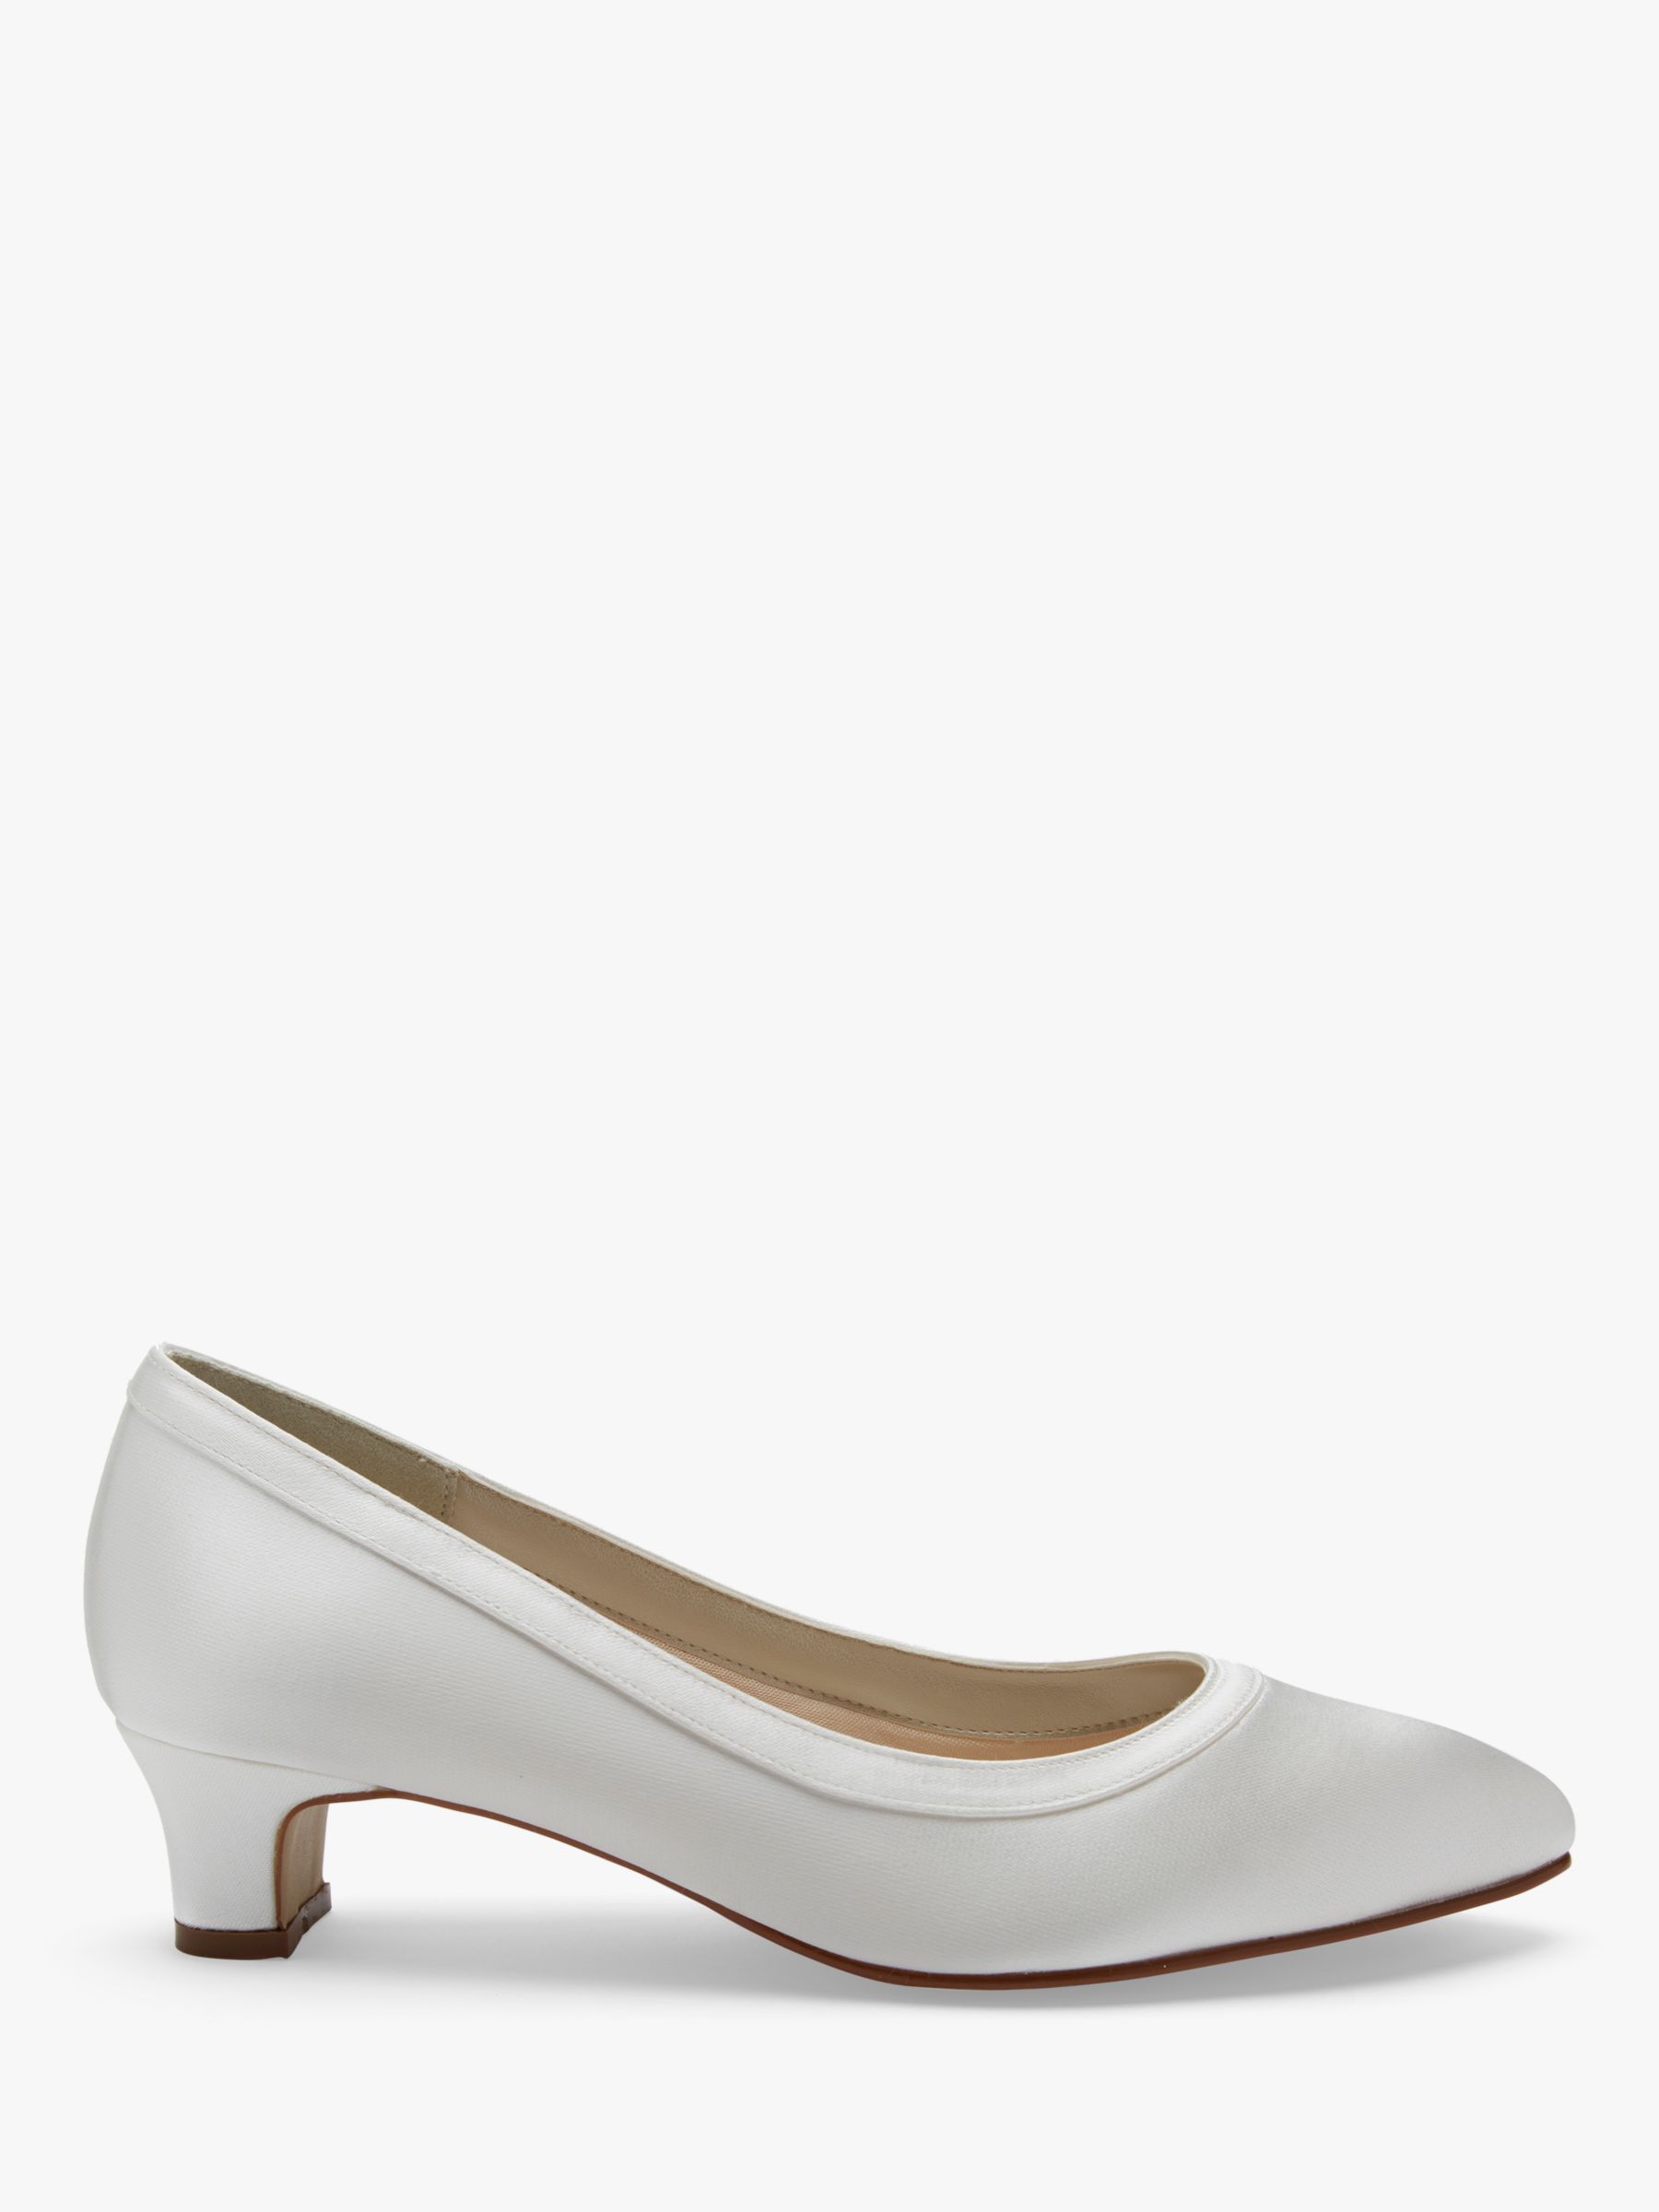 Rainbow Club Gisele Wide Fit Court Shoes, Ivory at John Lewis & Partners